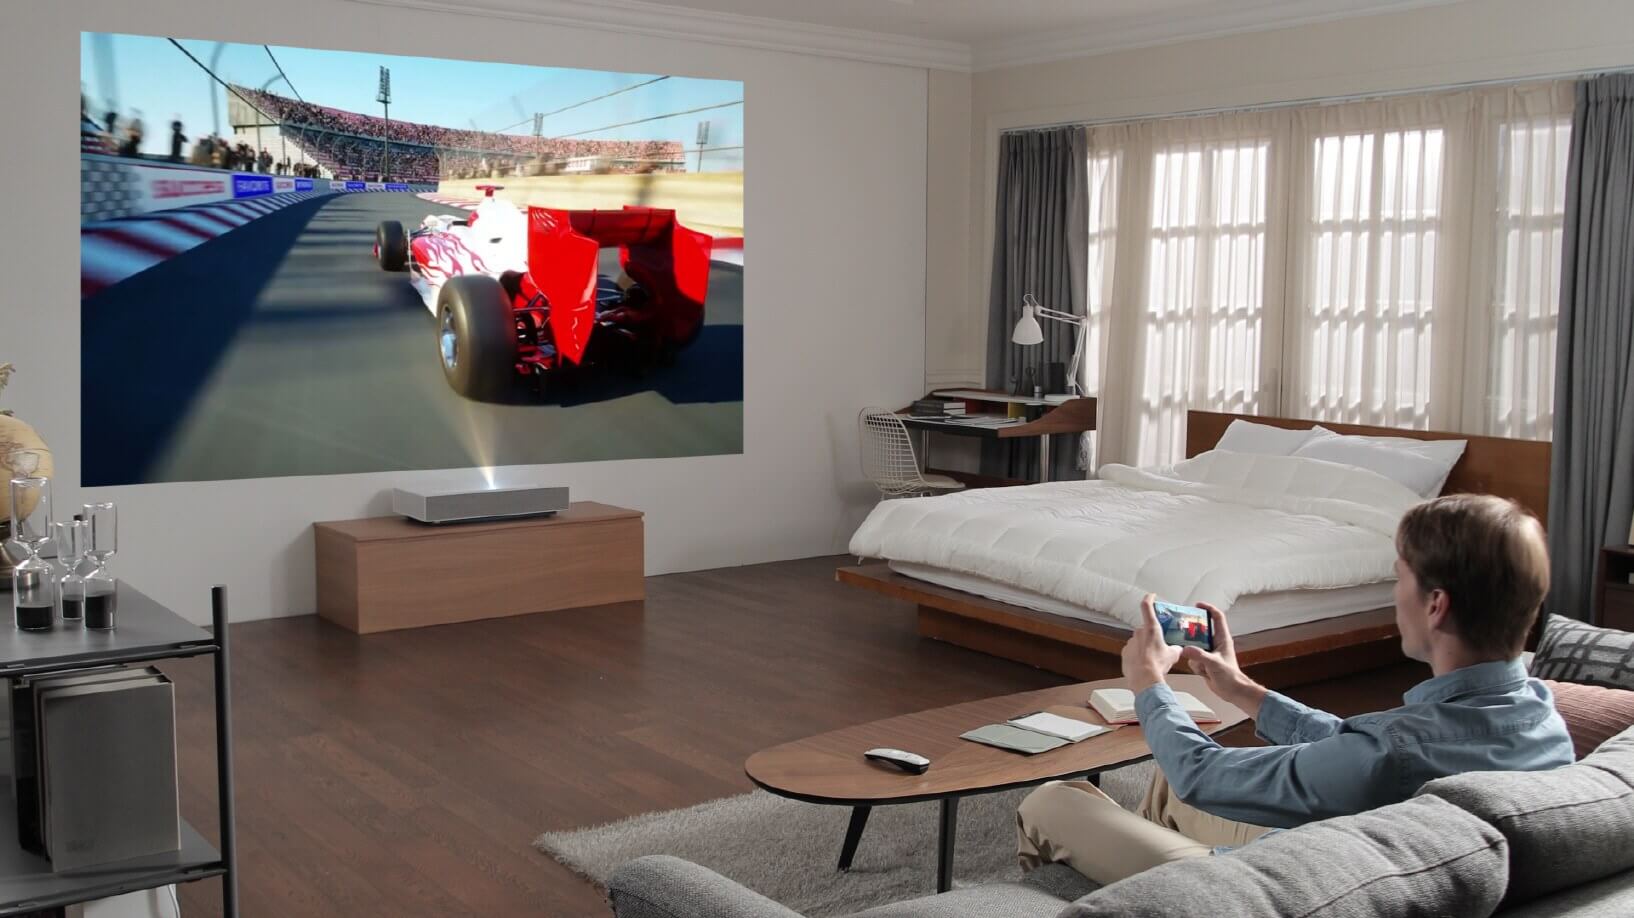 LG set to unveil new 4K short throw projector at CES